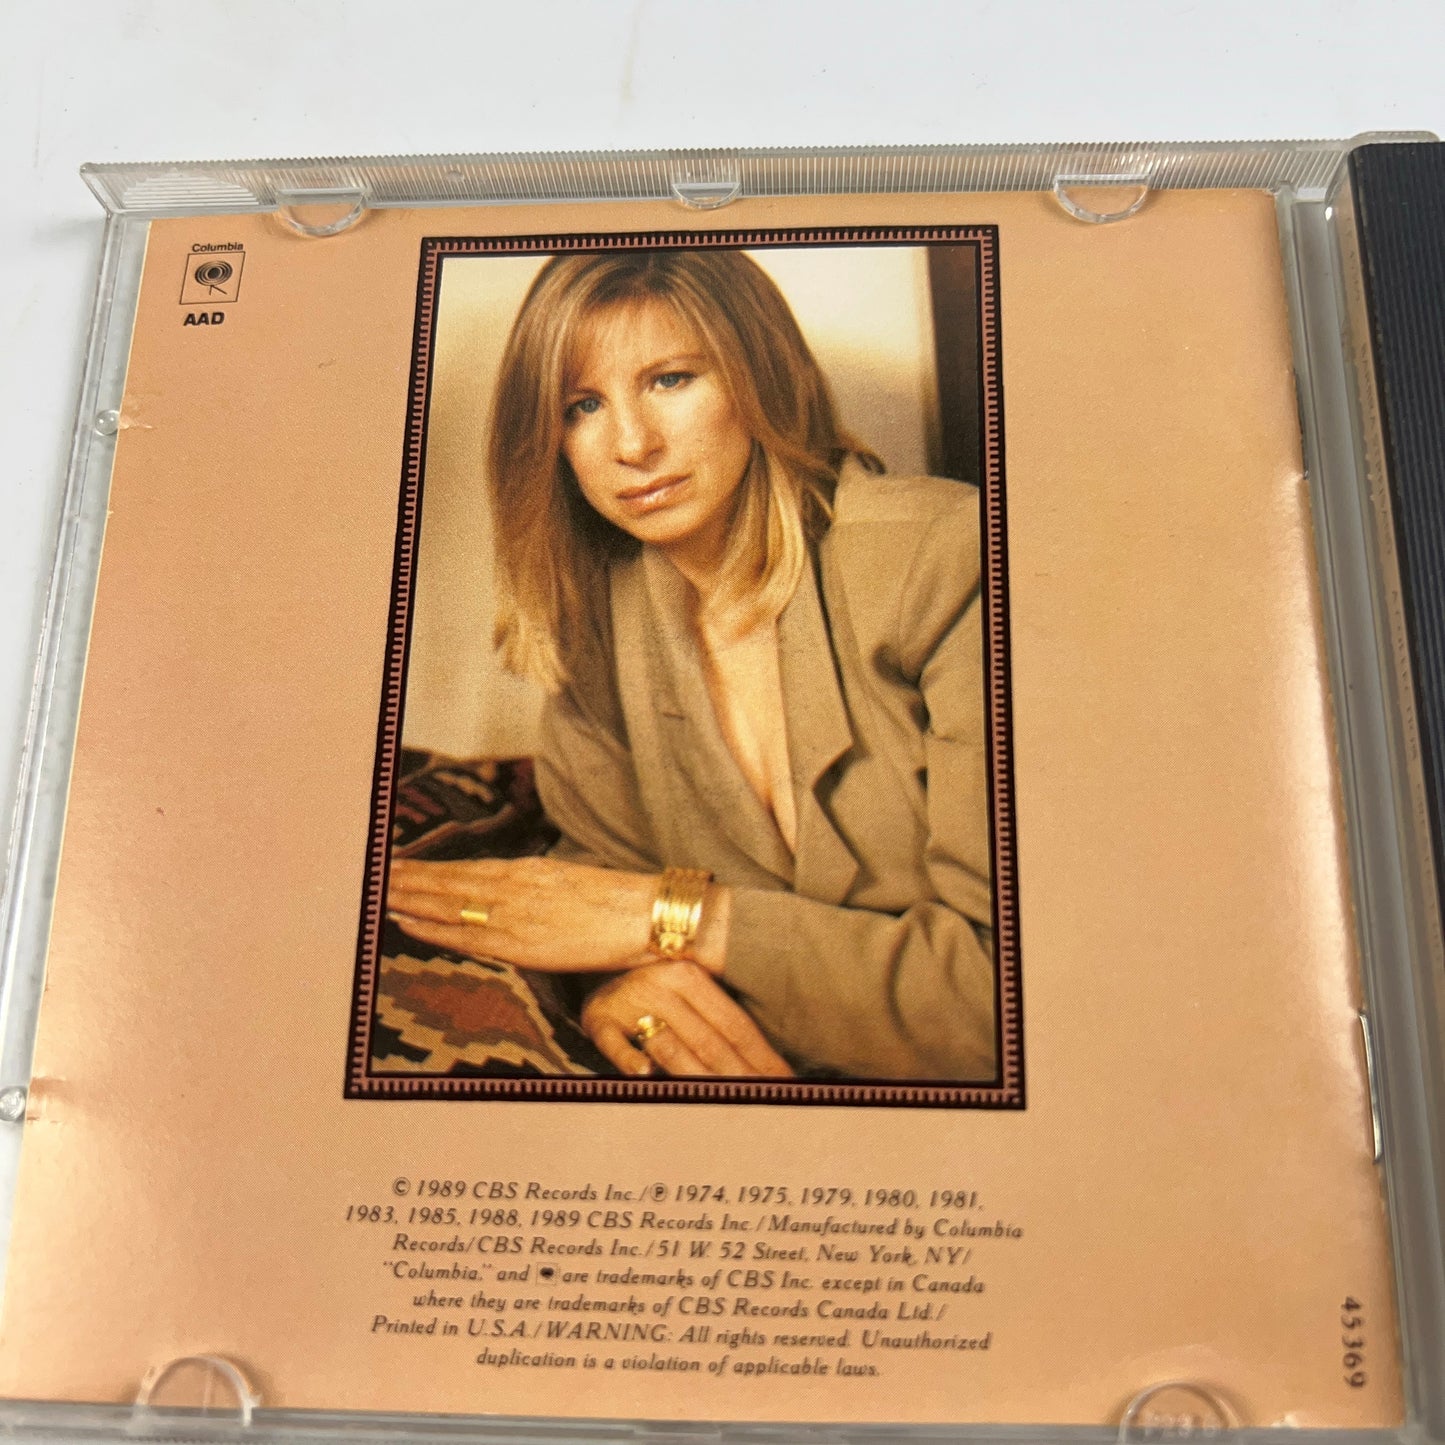 Collection: Greatest Hits & More by Streisand, Barbra (CD, 1989)